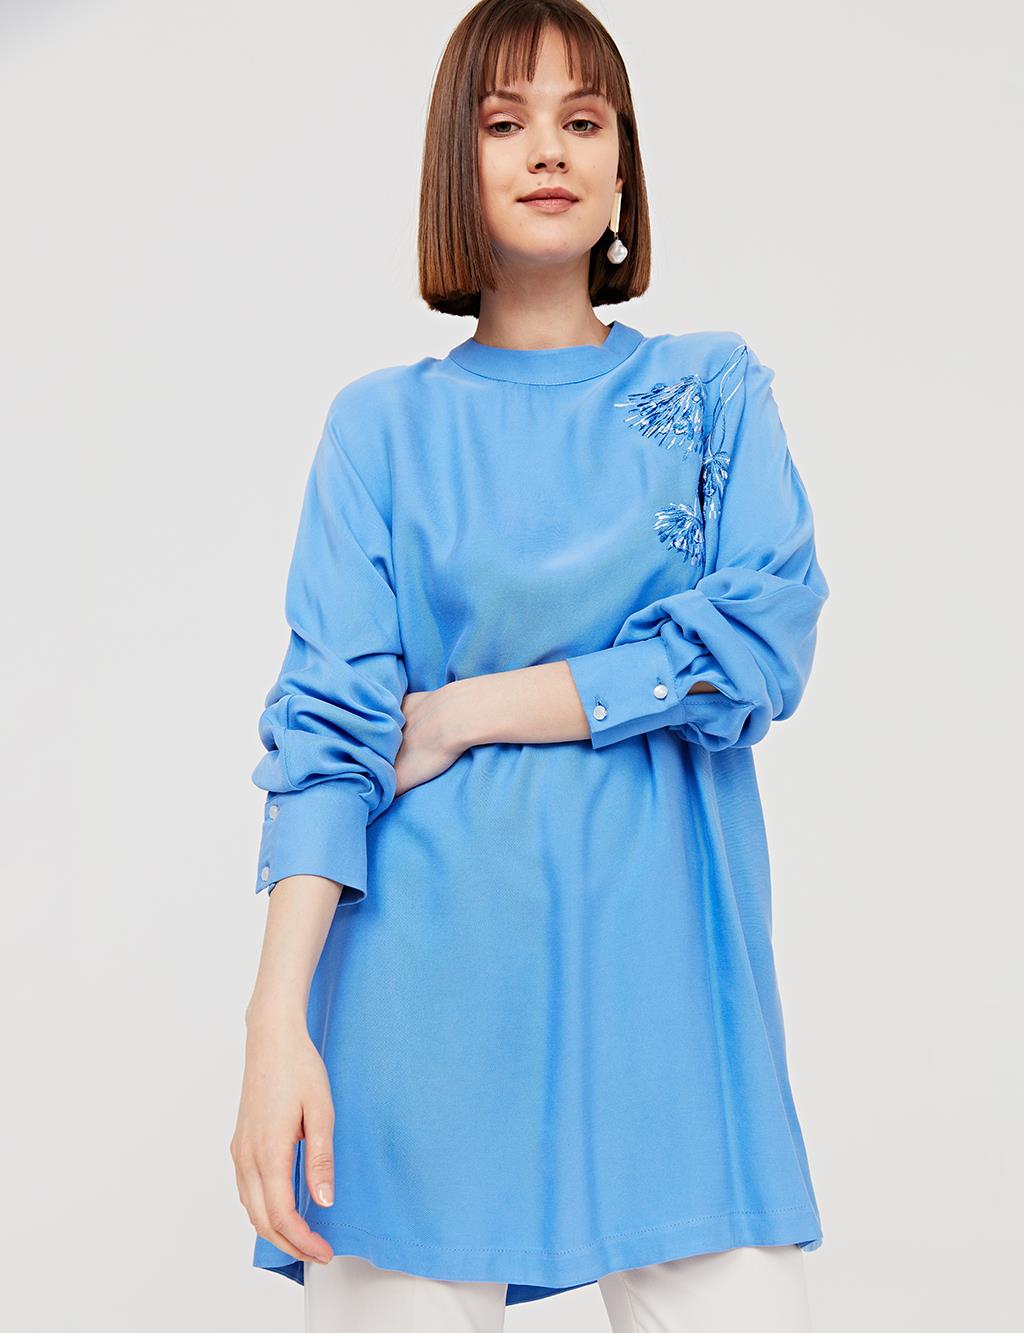 Embroidered Round Neck Collar Blouse B21 10133 Blue